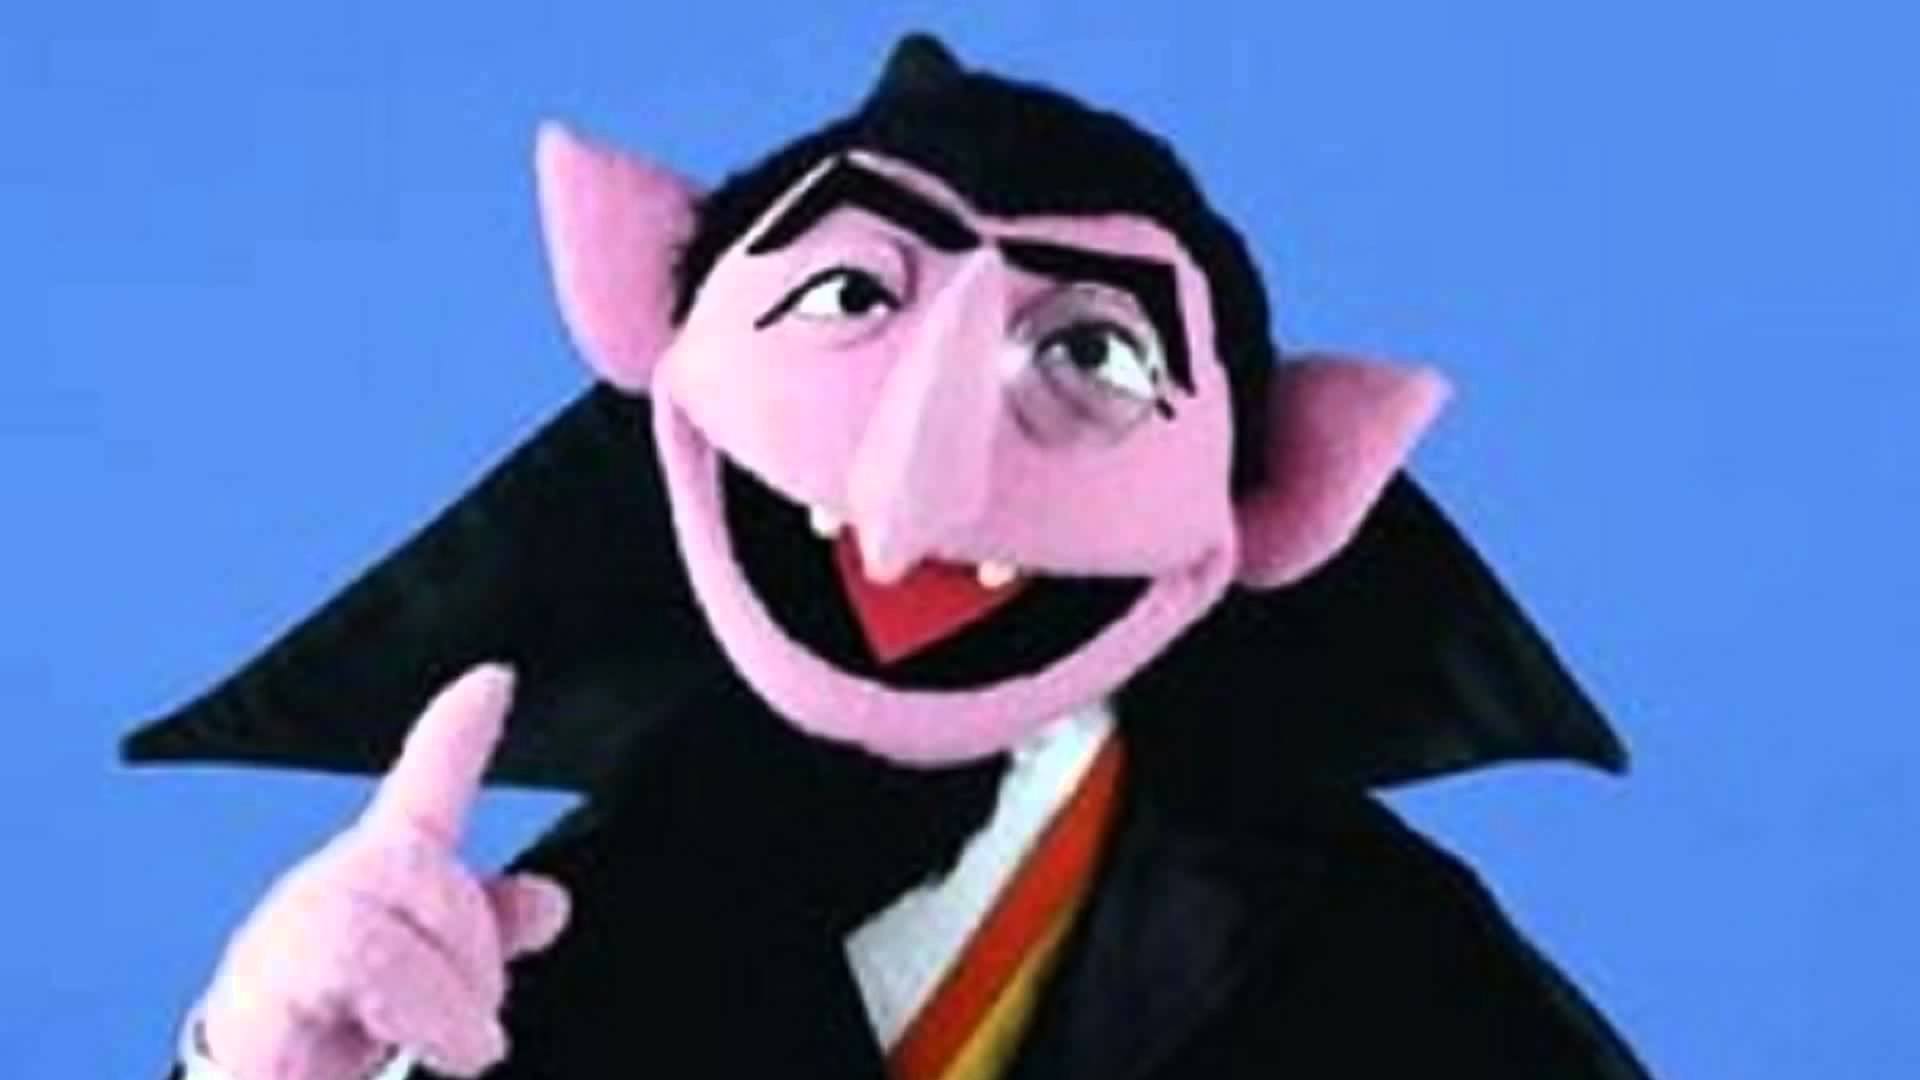 The Count Blank Meme Template